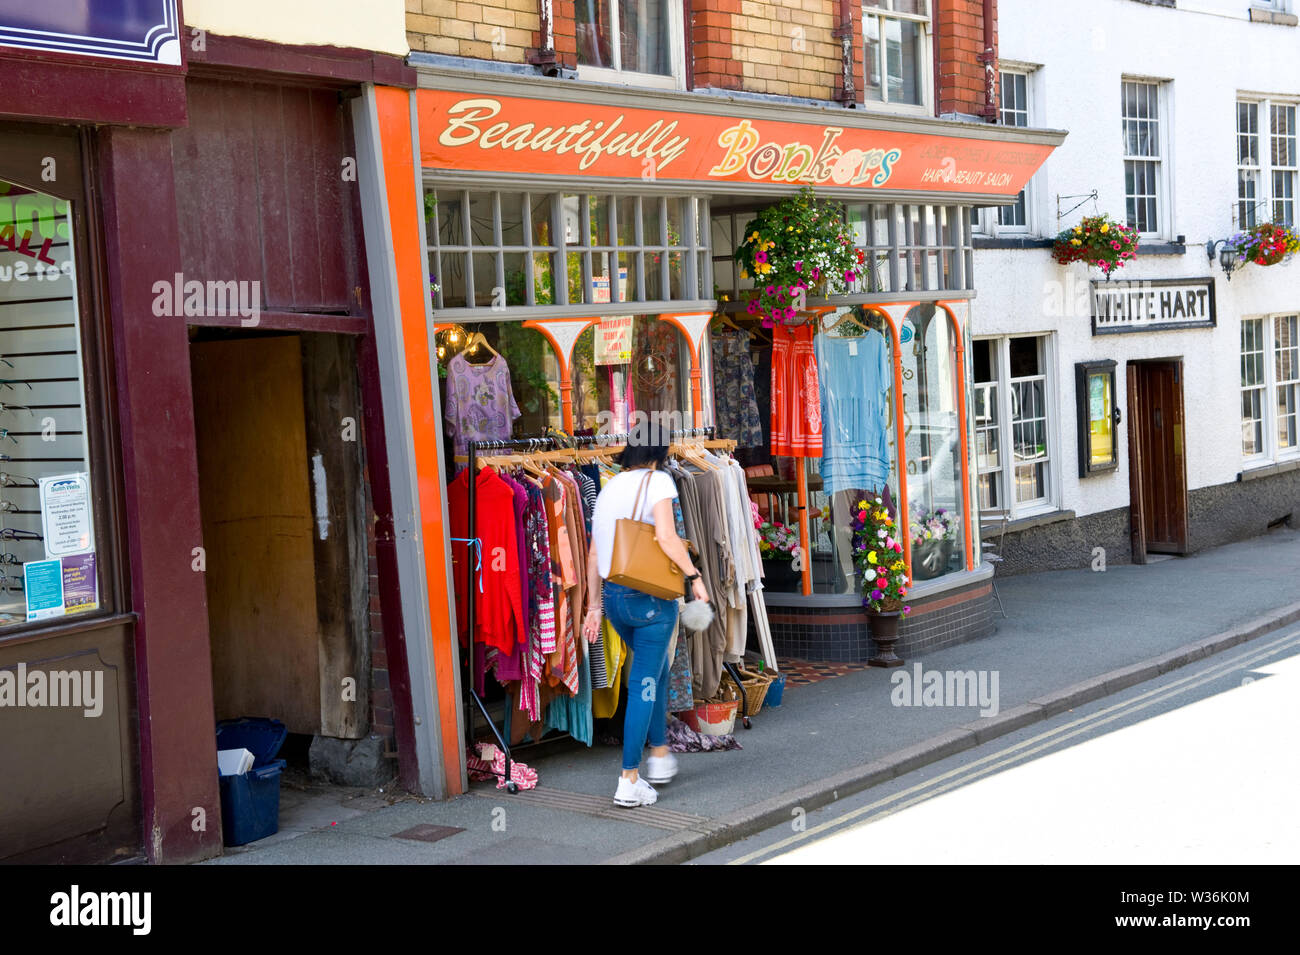 Beautifully Bonkers ladies shop in the town centre at Builth Wells Powys Wales UK Stock Photo